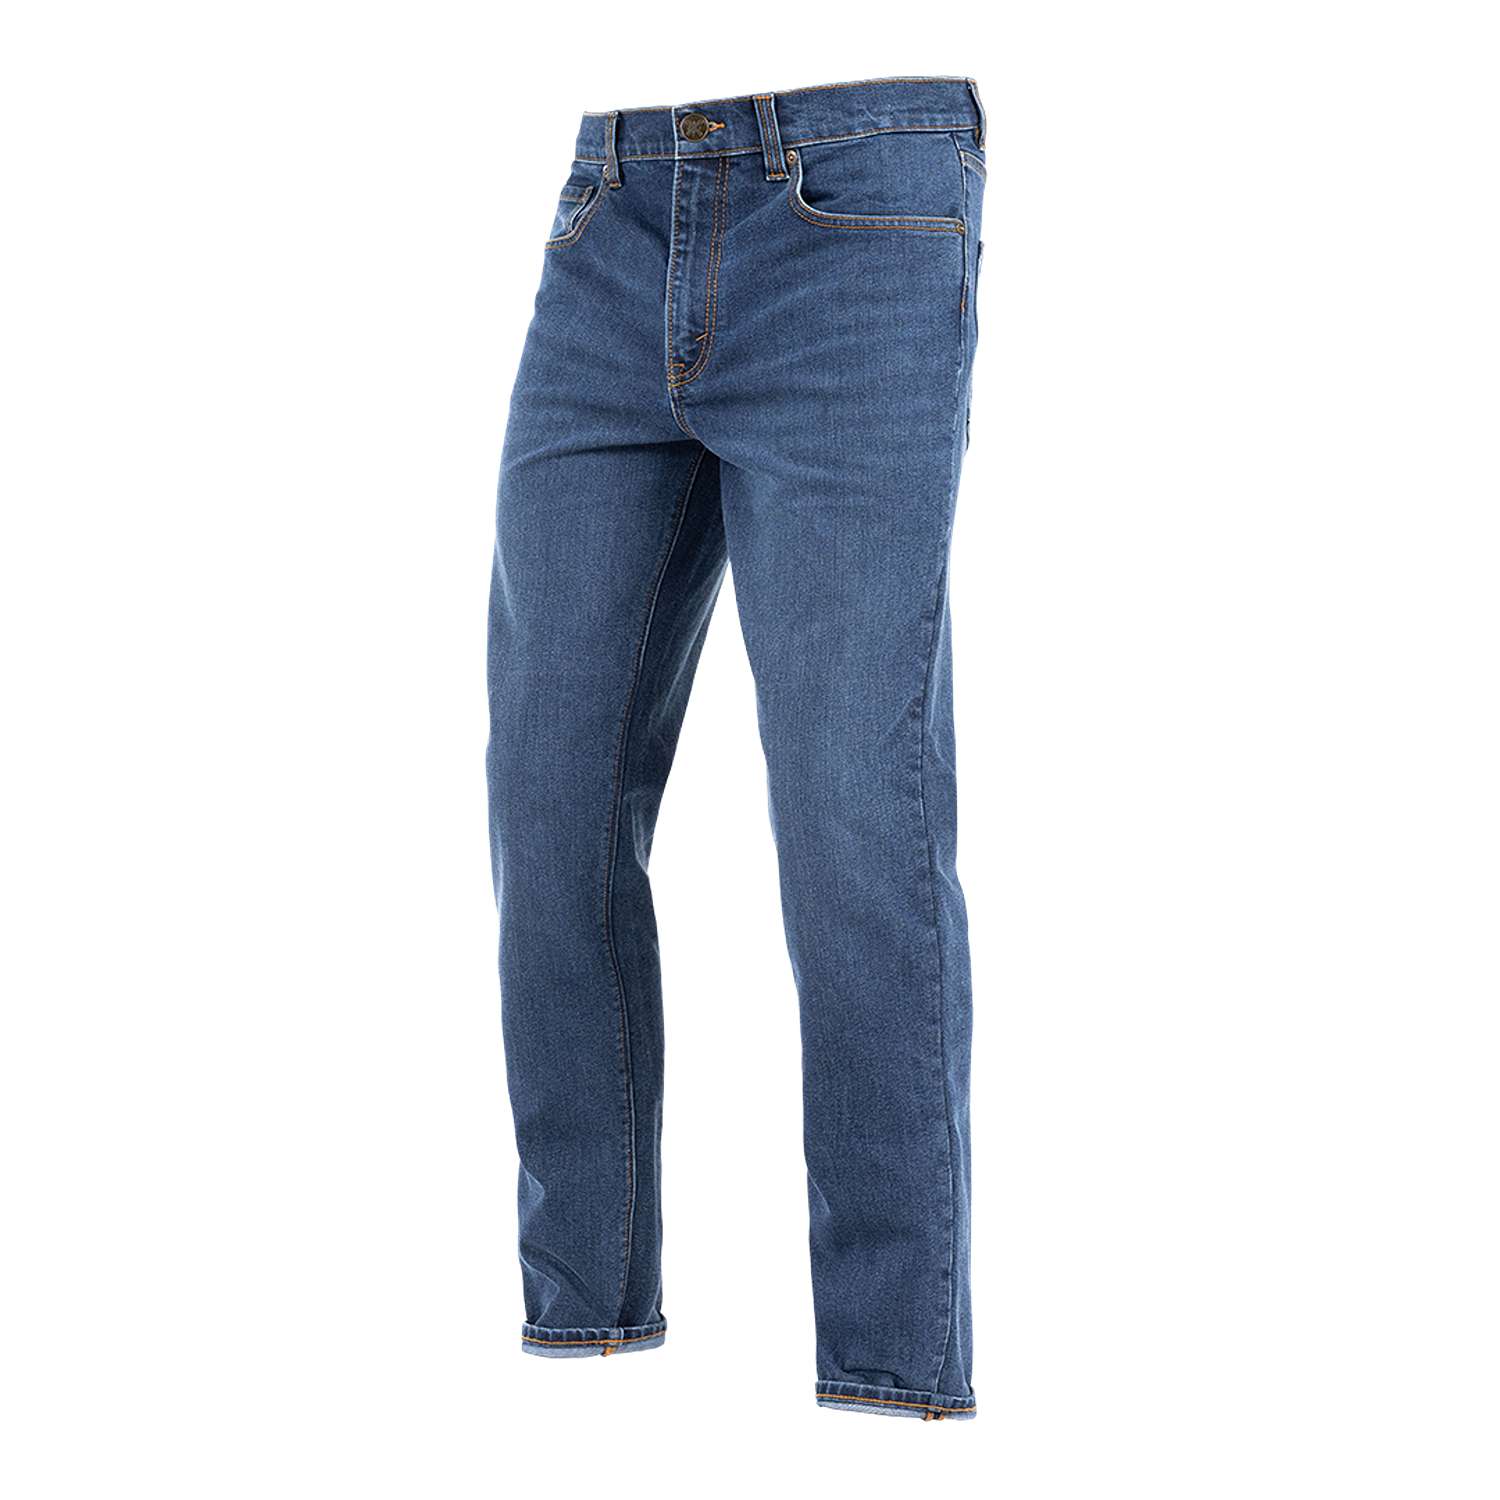 Image of John Doe Classic Tapered Jeans Indigo Taille W38/L32